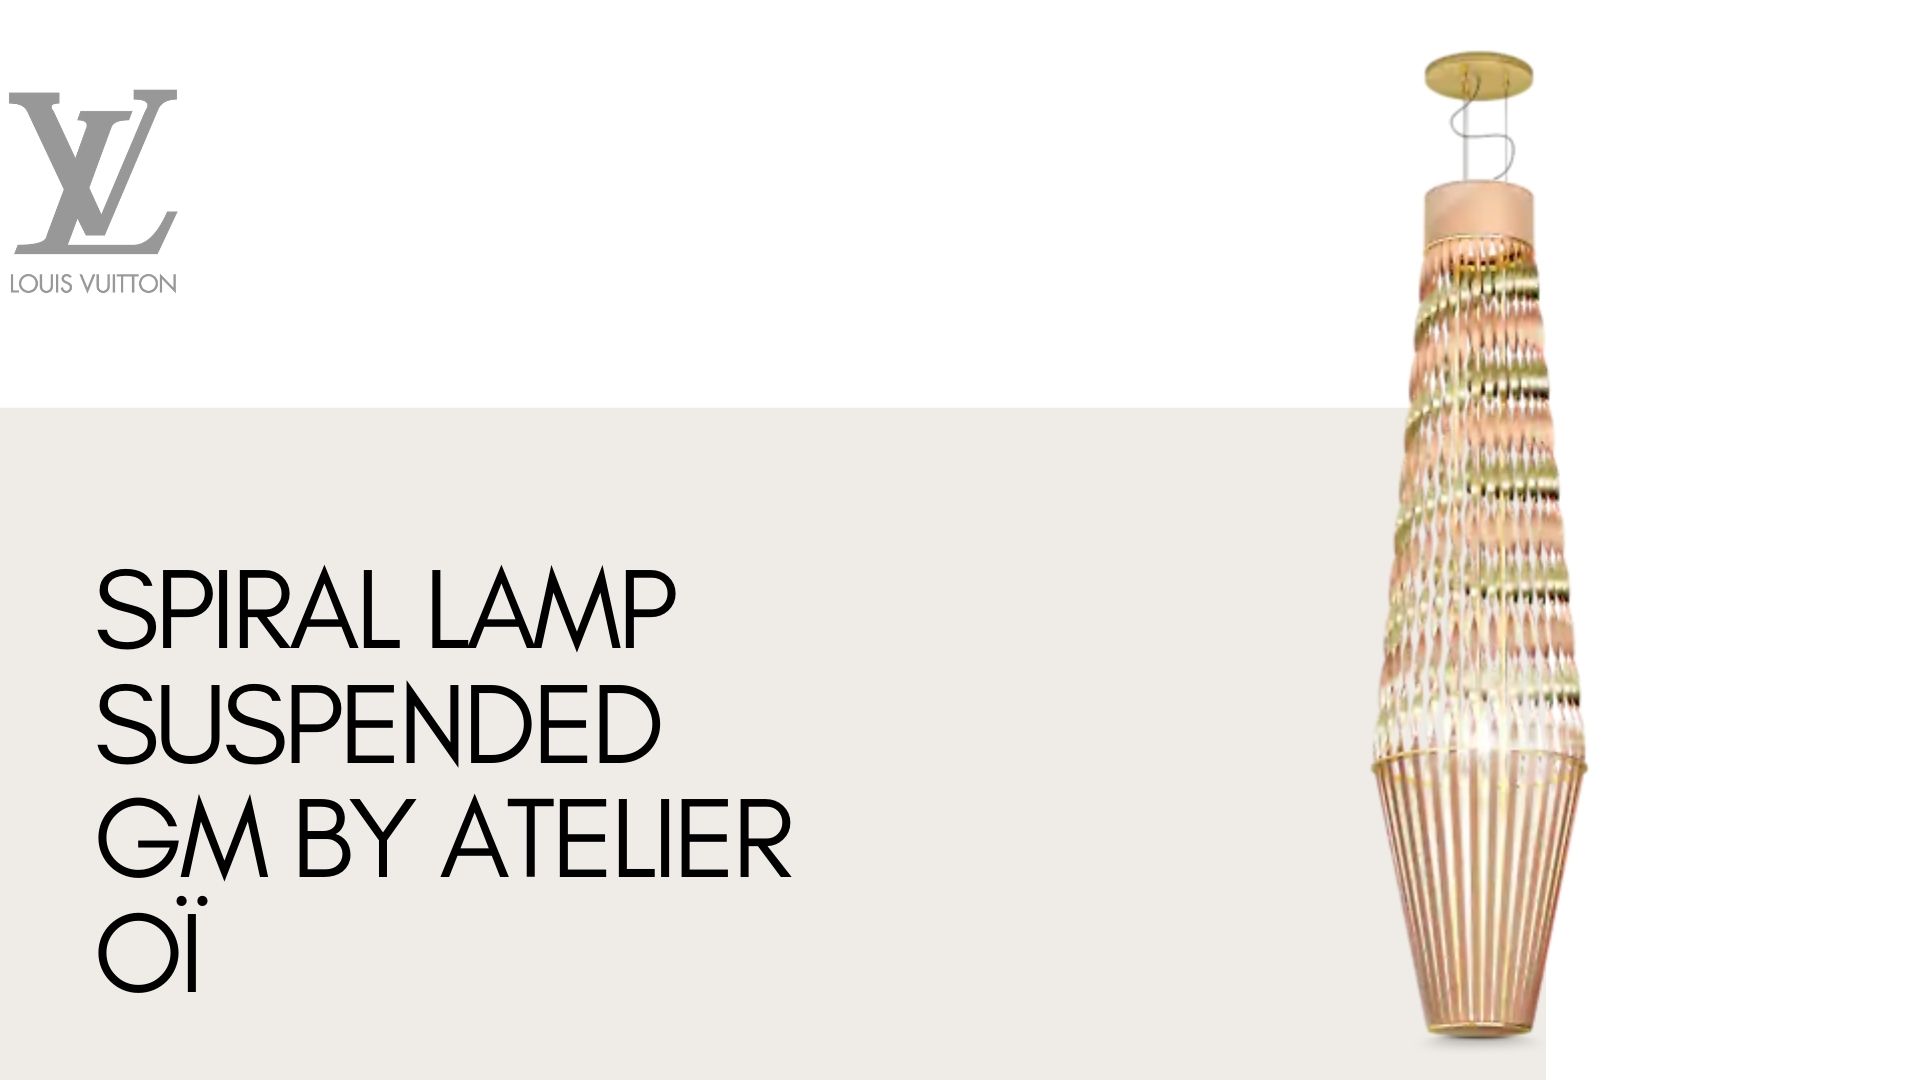 SPIRAL LAMP SUSPENDED GM BY ATELIER OÏ